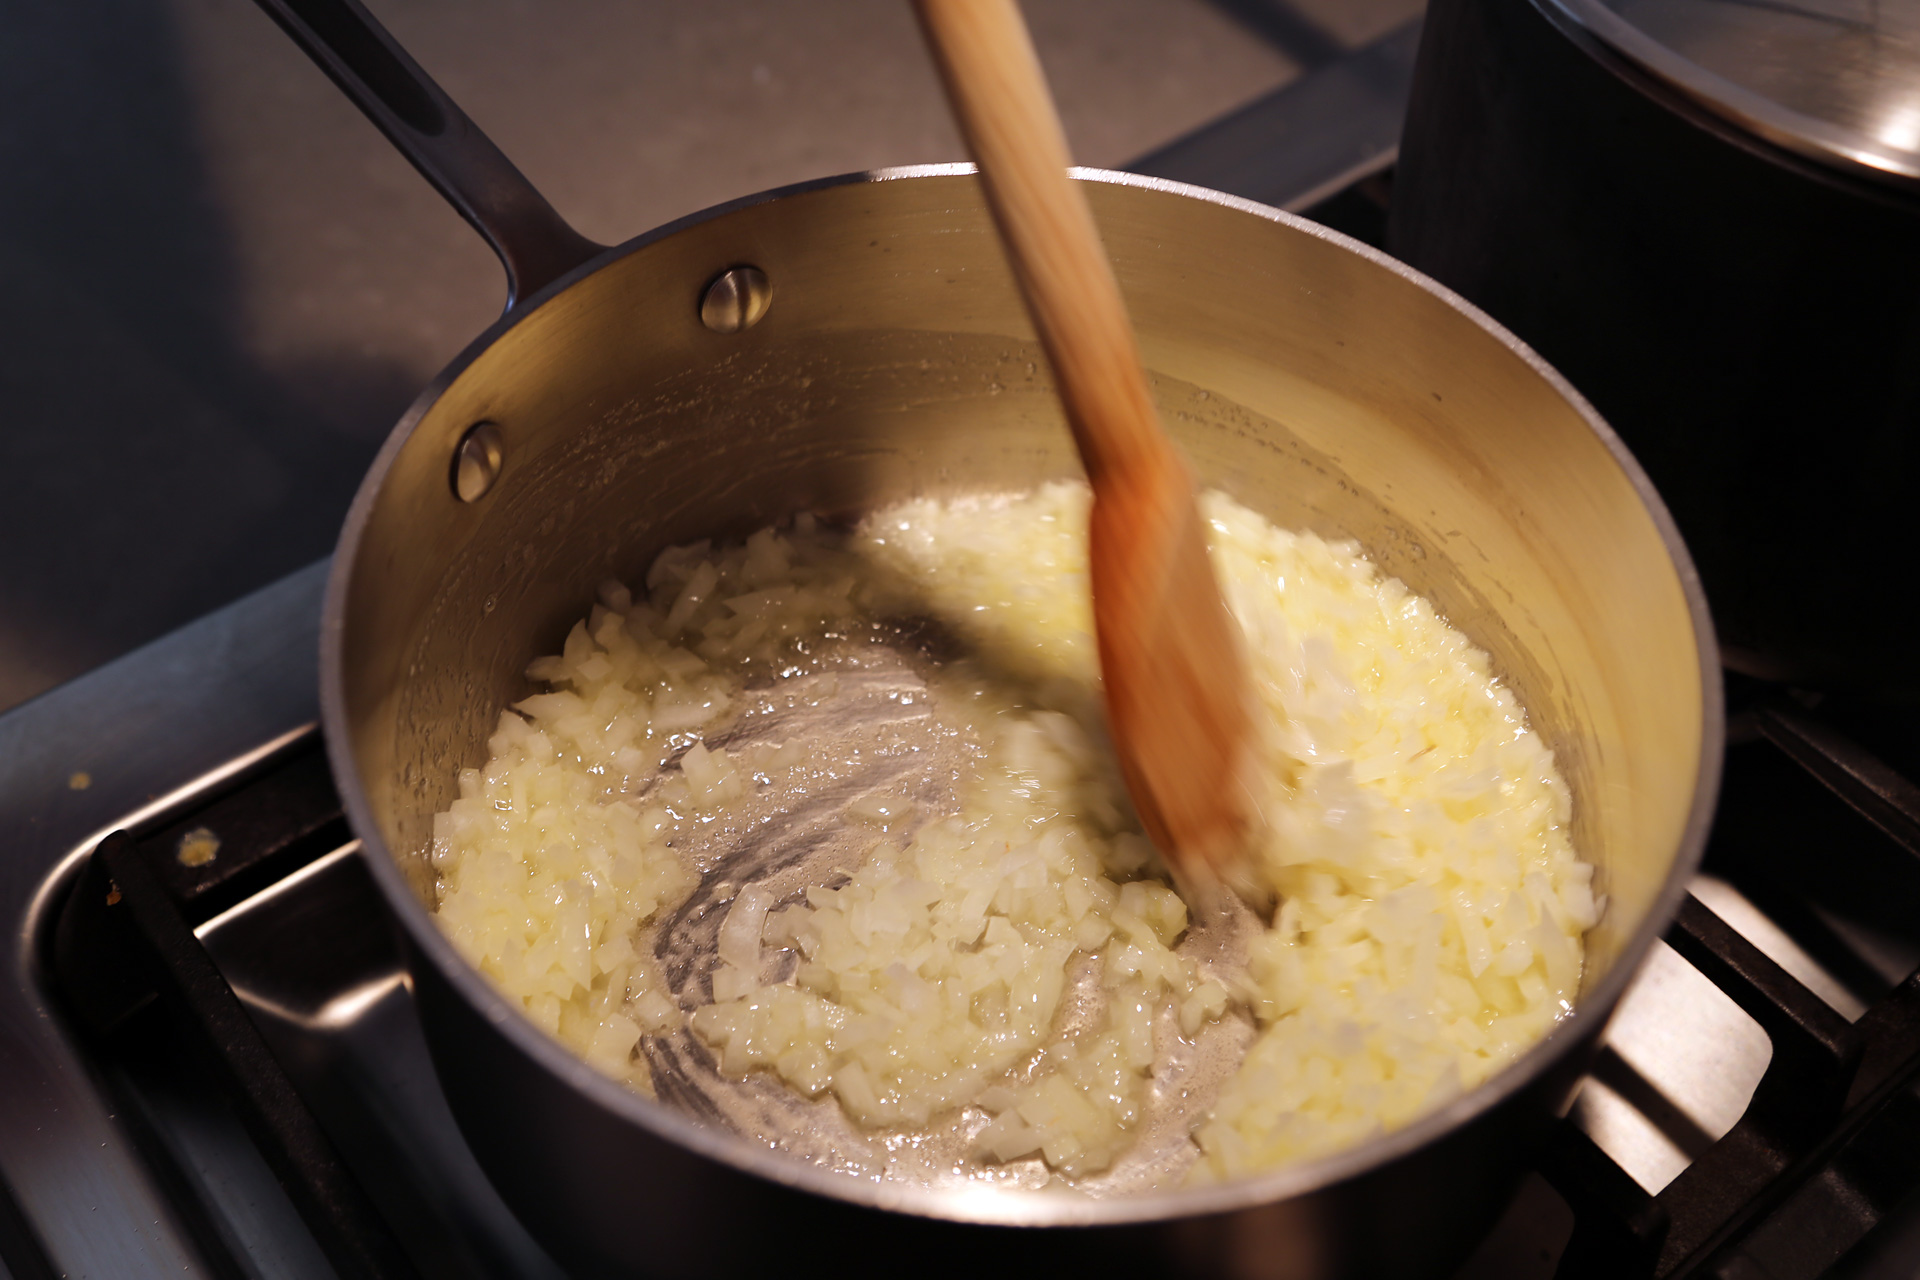 To make the gravy, in a large saucepan, melt the butter over medium-low heat. Add the onion and a pinch of salt and cook.